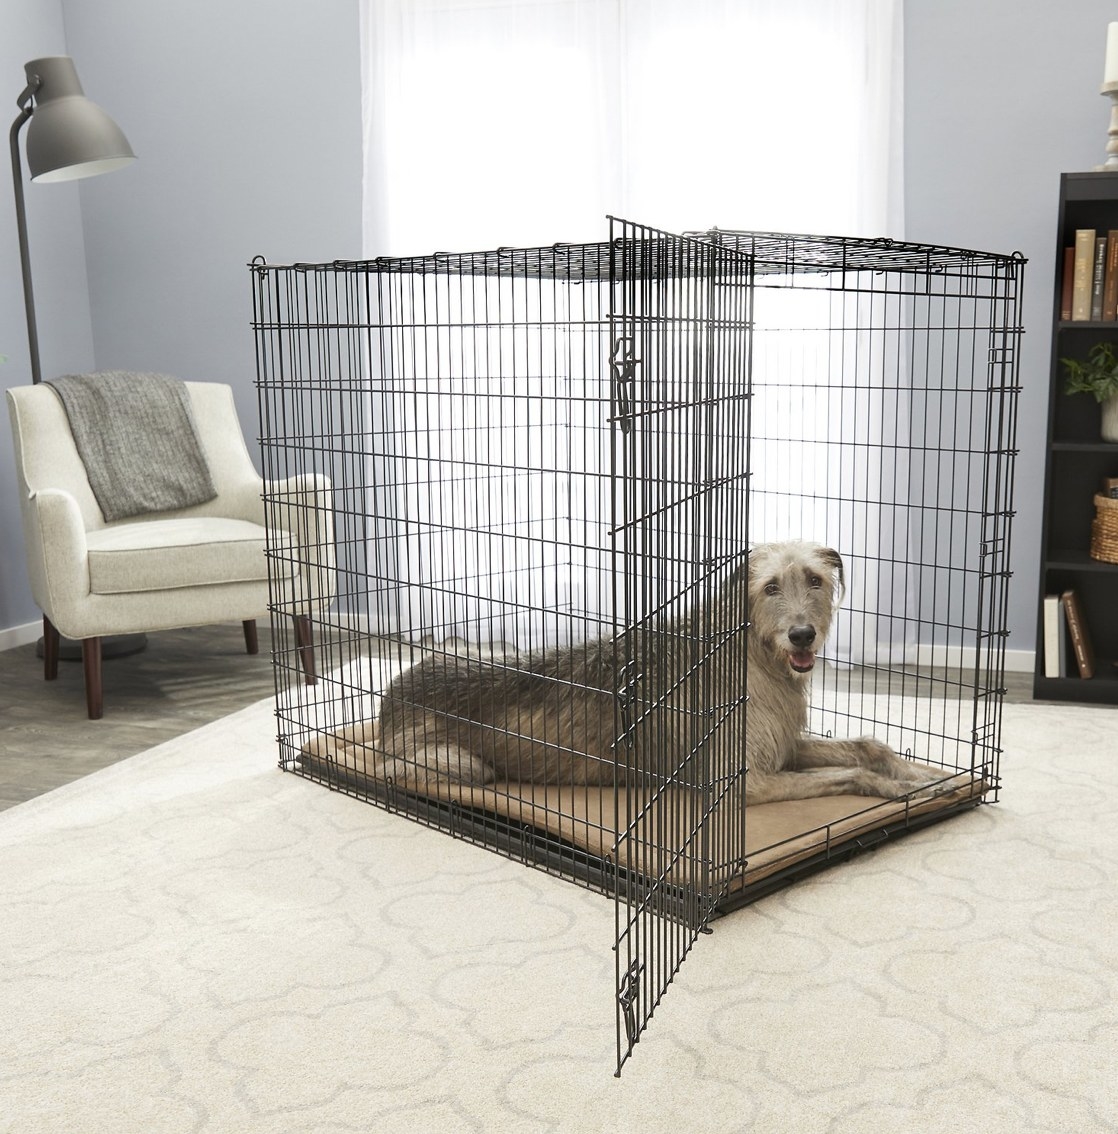 A large crate with a gray dog